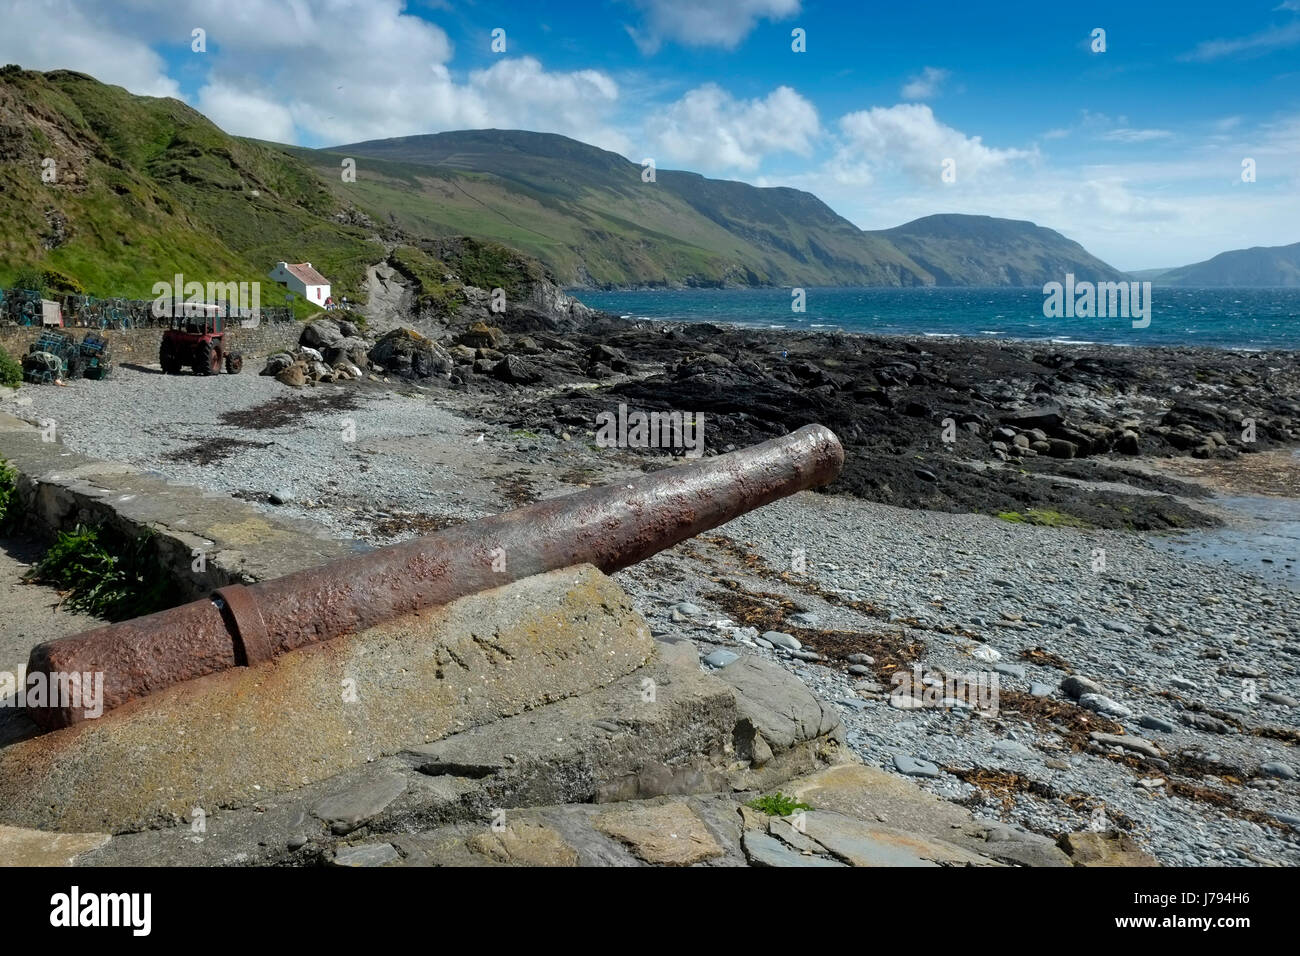 Niarbyl Isle Of Man Showing The Beach Bay Row Of Cottages And